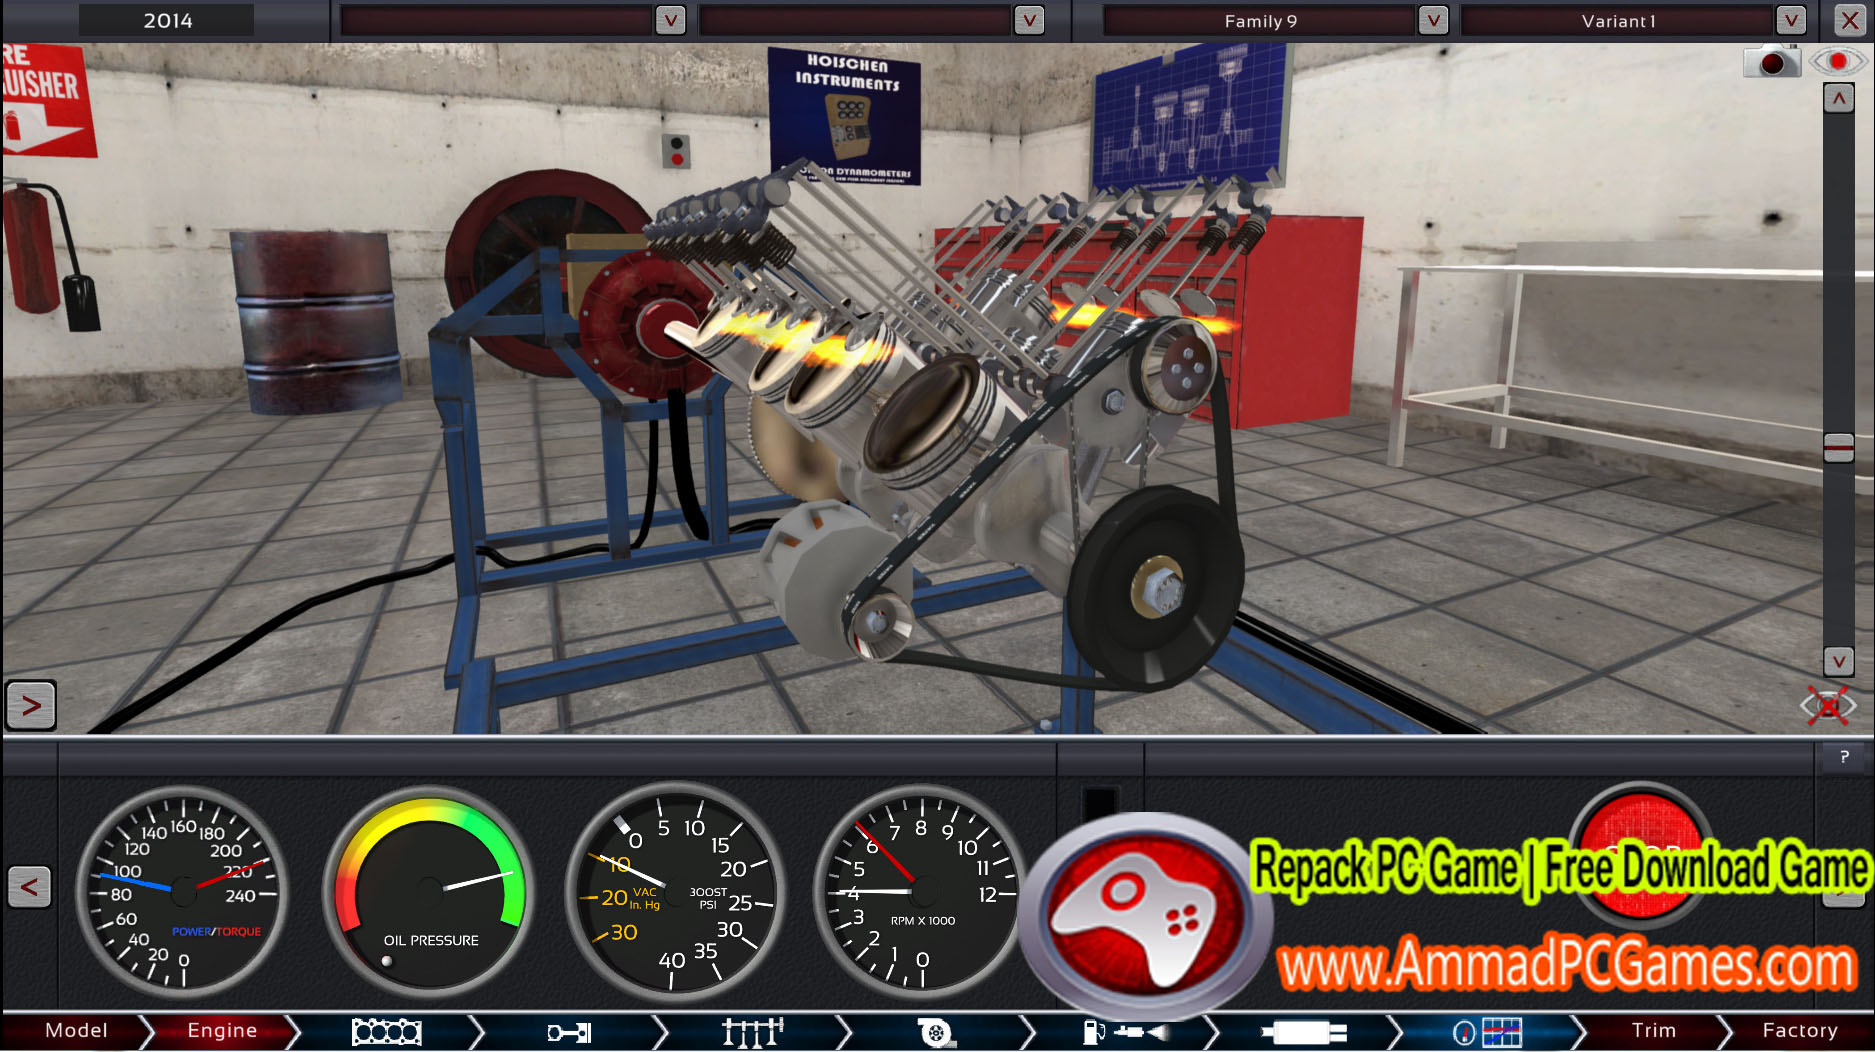 Automation The Car Company Tyoon V.4.2.20 Free Download Repack Game